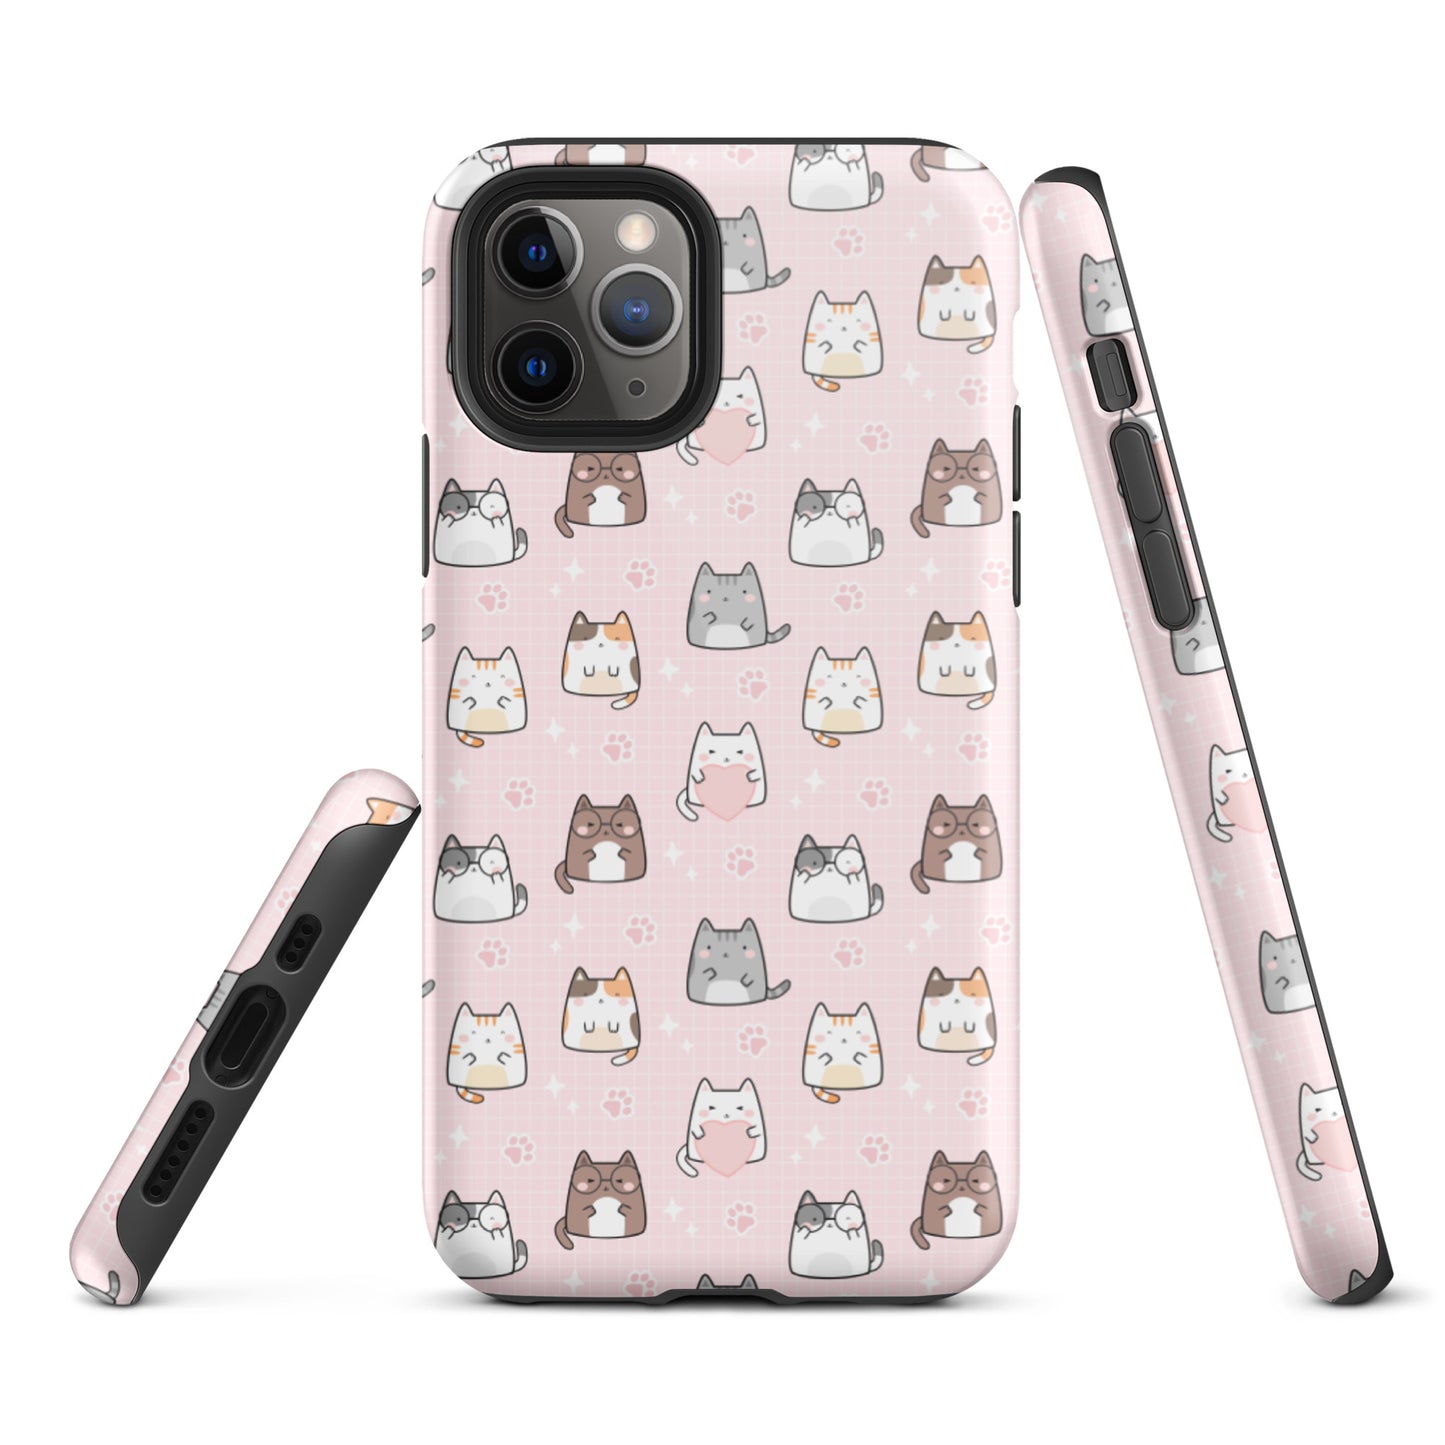 Tough case for iPhone 11, 12, 13, 14, 15 Variations | Cute Cat with Heart Pink Background